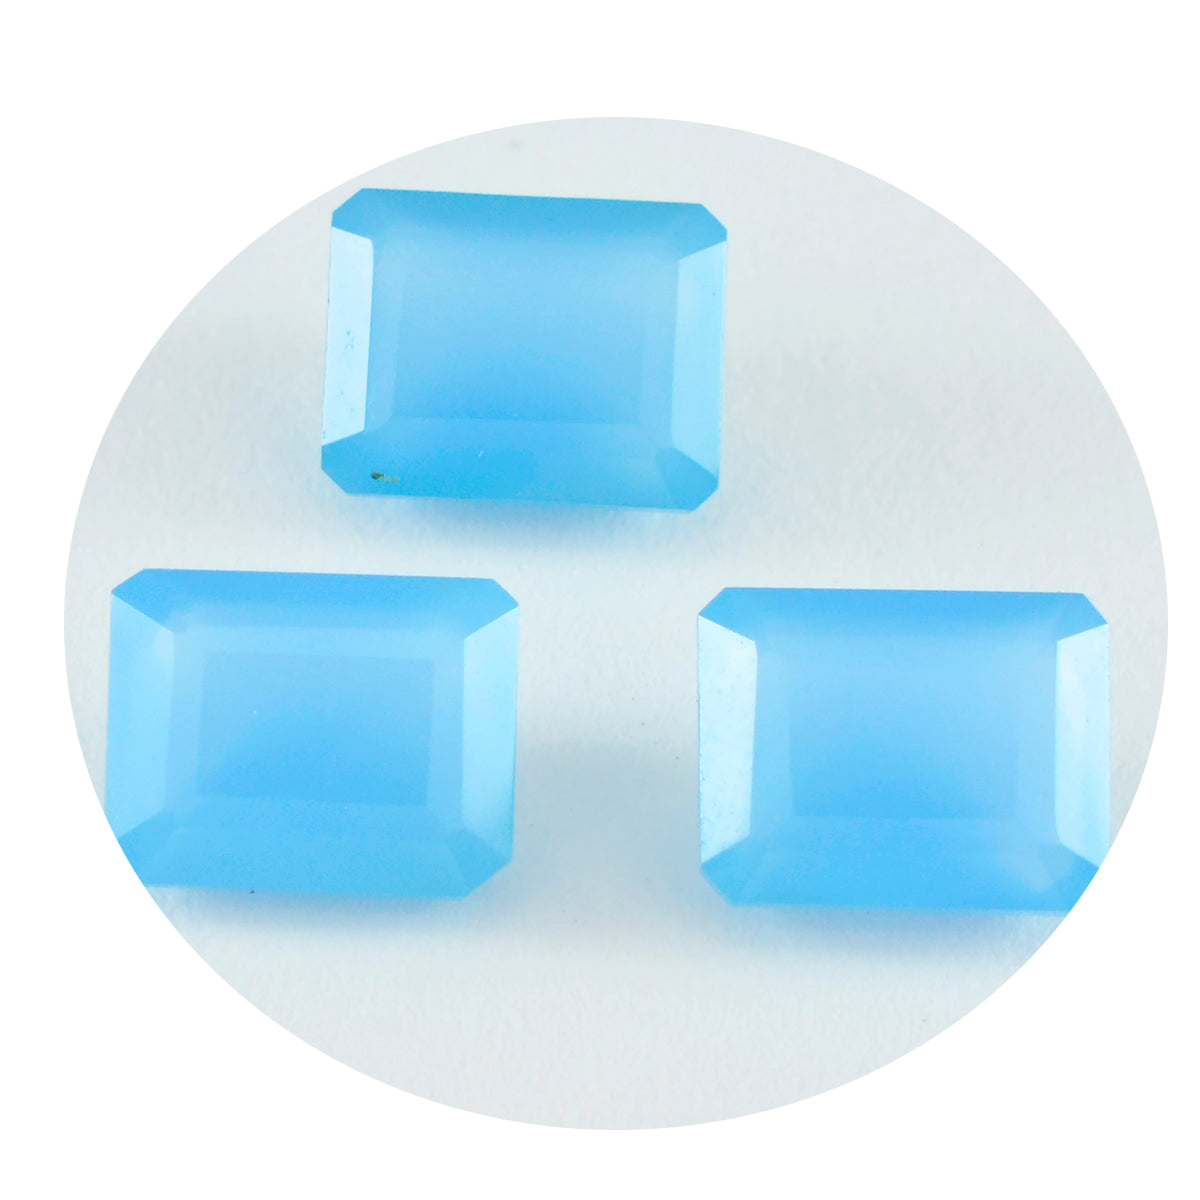 Riyogems 1PC Natural Blue Chalcedony Faceted 9x11 mm Octagon Shape superb Quality Loose Stone